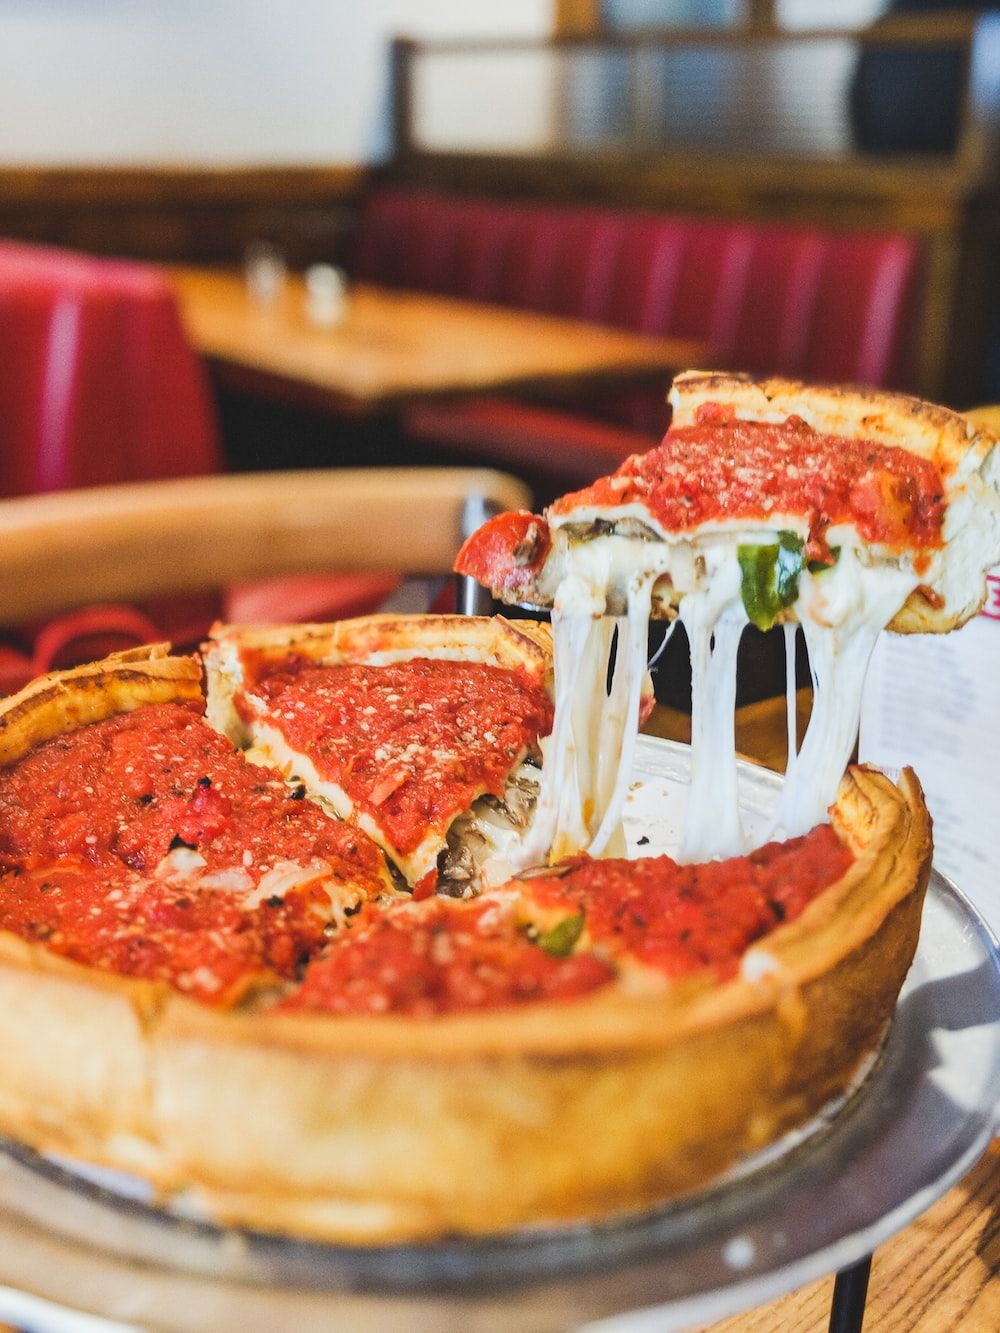 Chicago Pizza Picture. Download Free Image